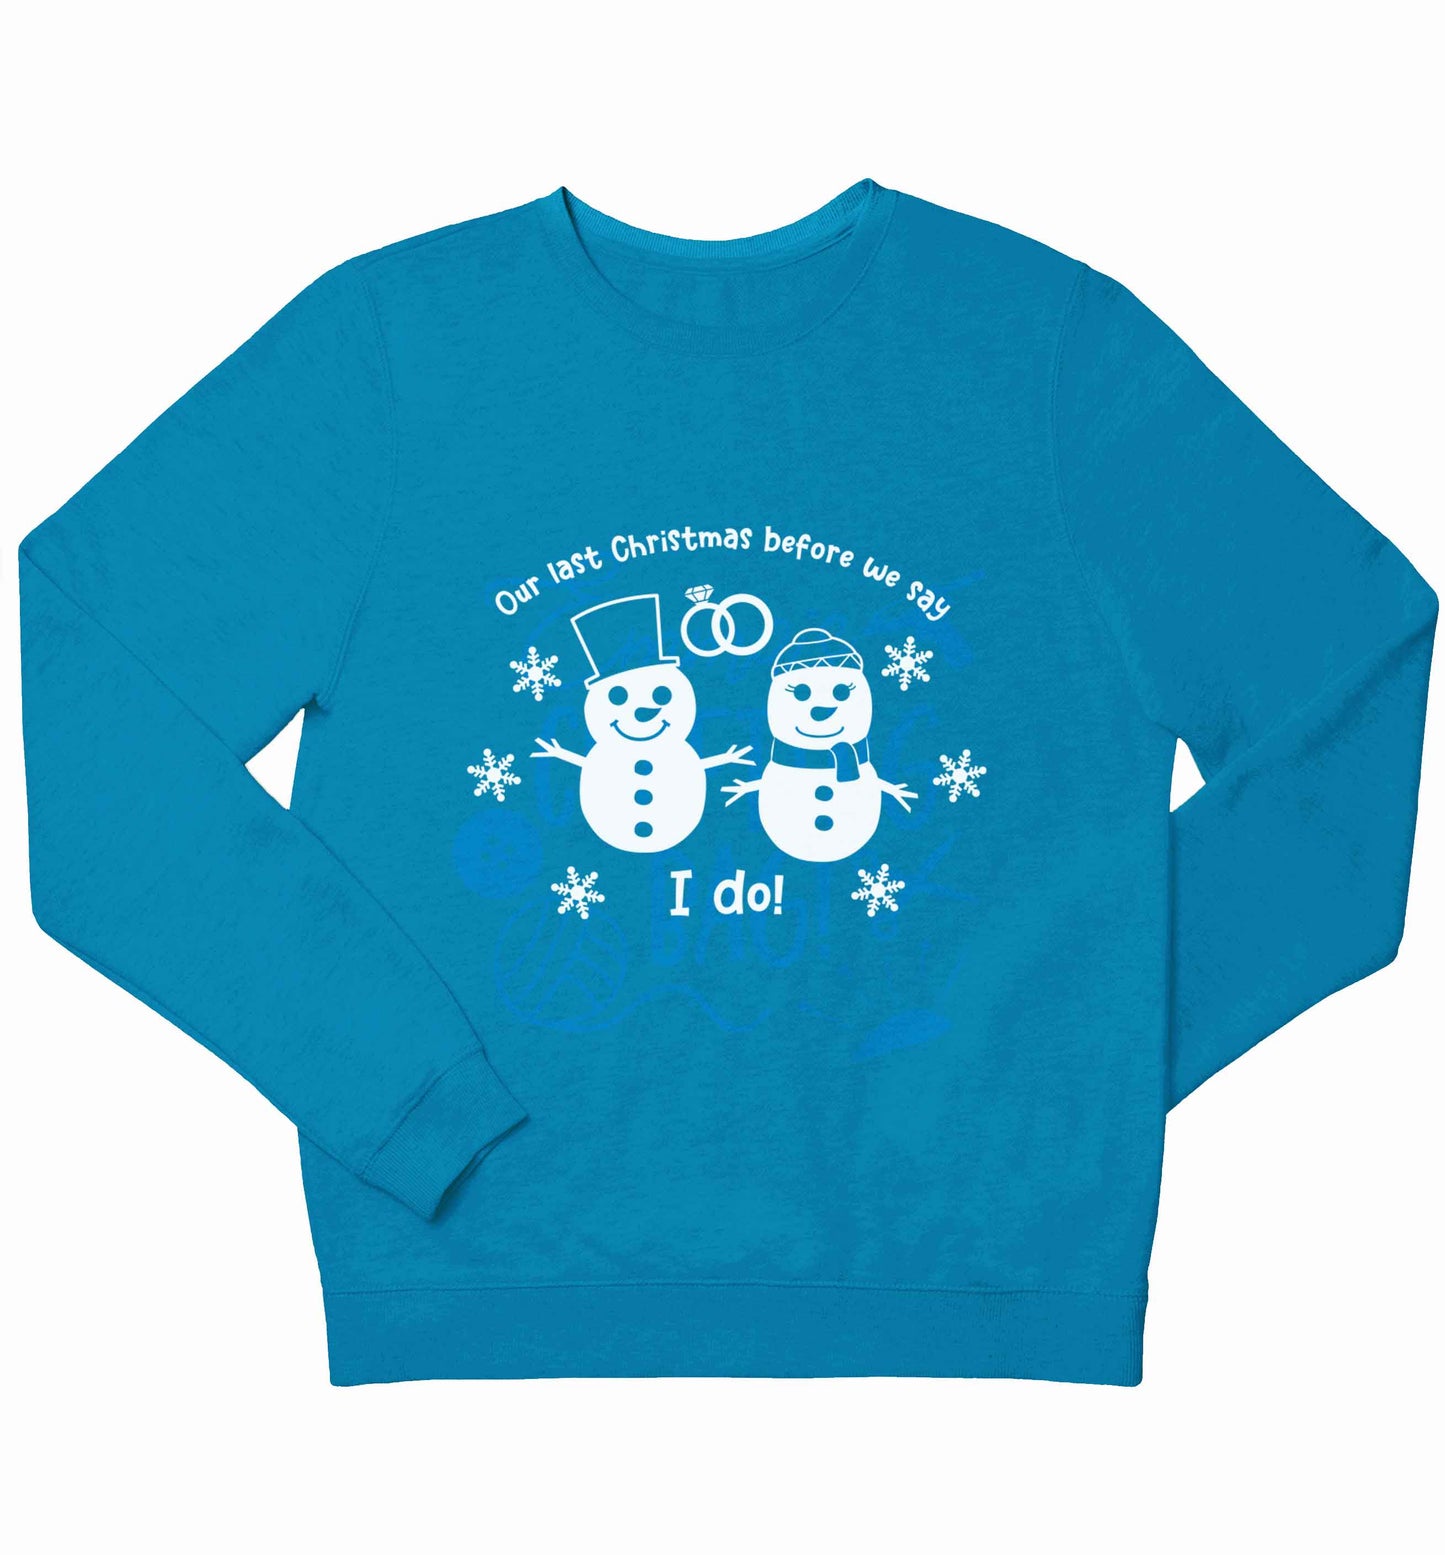 Last Christmas before we say I do children's blue sweater 12-13 Years